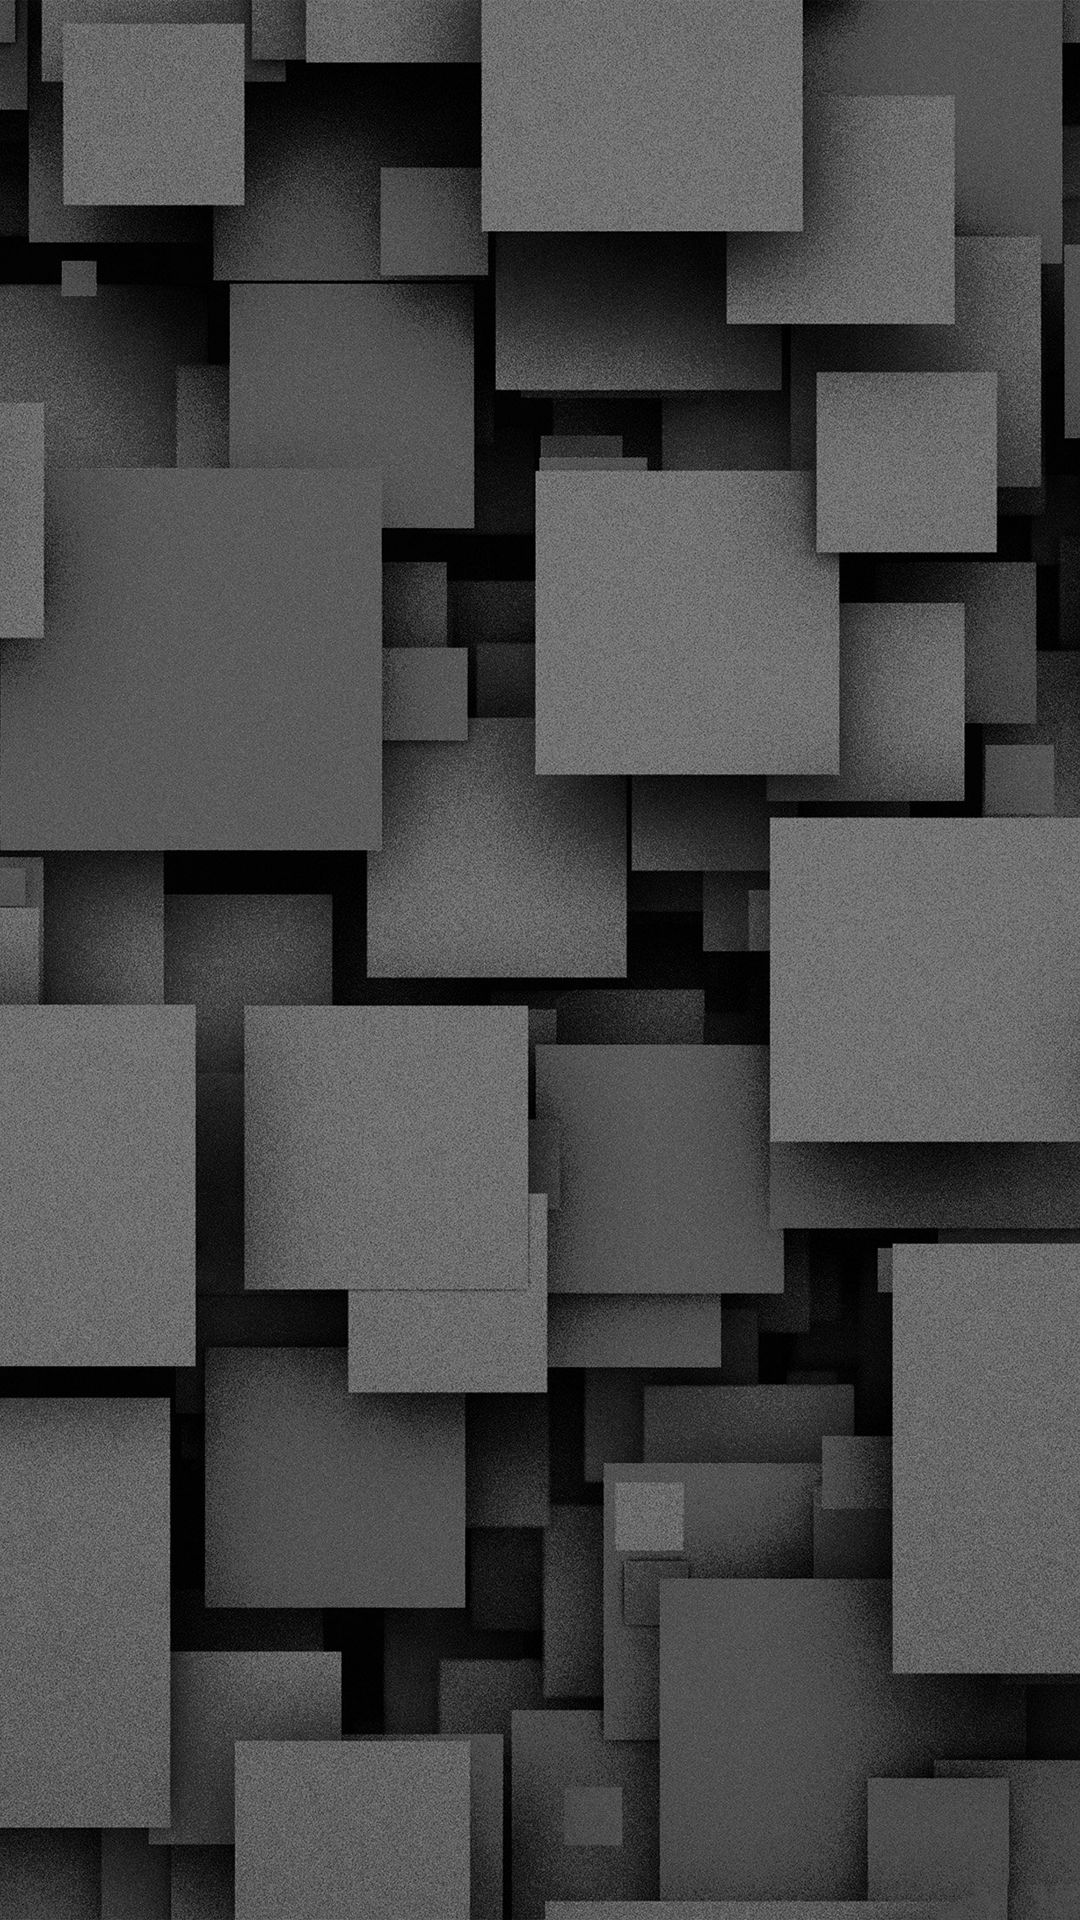 Square Party Dark Pattern IPhone 6 Wallpaper Download. IPhone Wallpaper, IPad Wallpaper One Stop Download. Pattern Iphone, Dark Wallpaper, IPhone Wallpaper